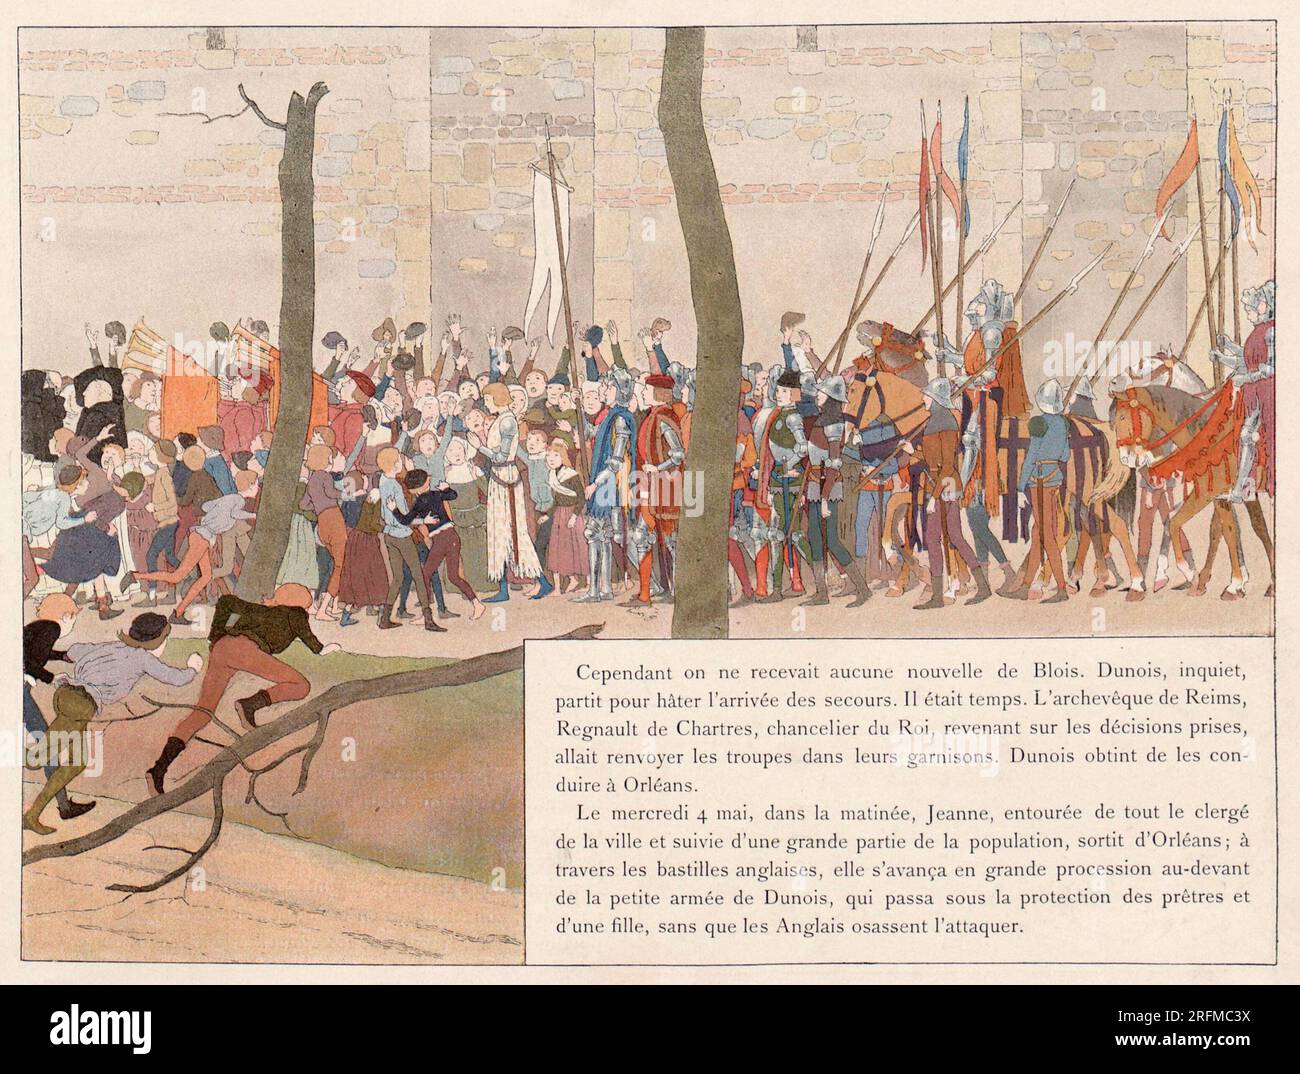 Jeanne, surrounded by all the city's clergy and followed by a large part of the population, left Orléans [...] without the English daring to attack her'.  Illustration published in the book 'Jeanne d'Arc' by Louis-Maurice Boutet de Monvel, published by Plon, Nourrit & Cie in 1896. Stock Photo